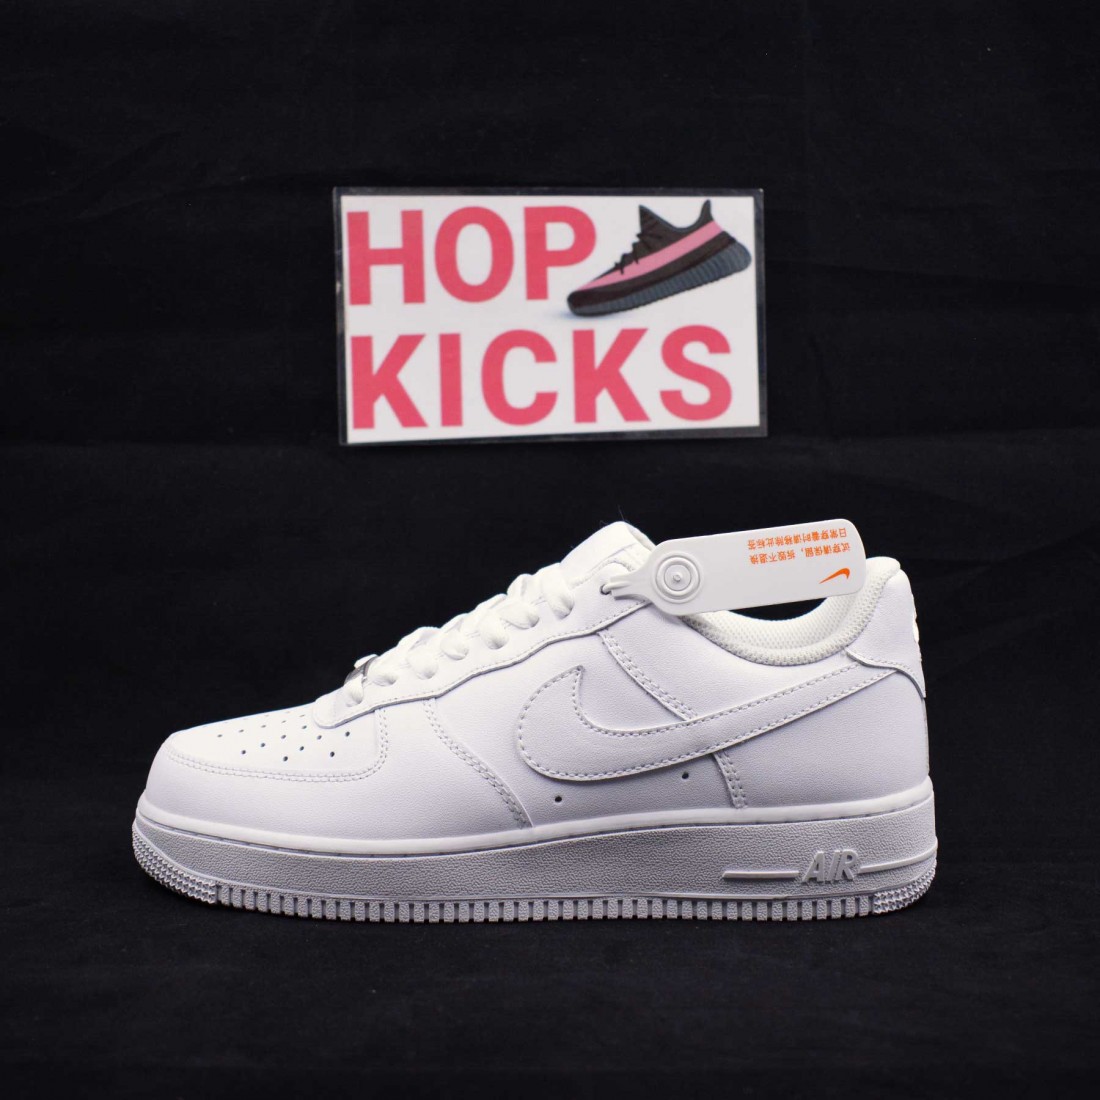 Buy Online Nike Air Force 1 Low White Materials] In Pakistan | Nike Air Force Low White [Premium Materials] Prices Pakistan